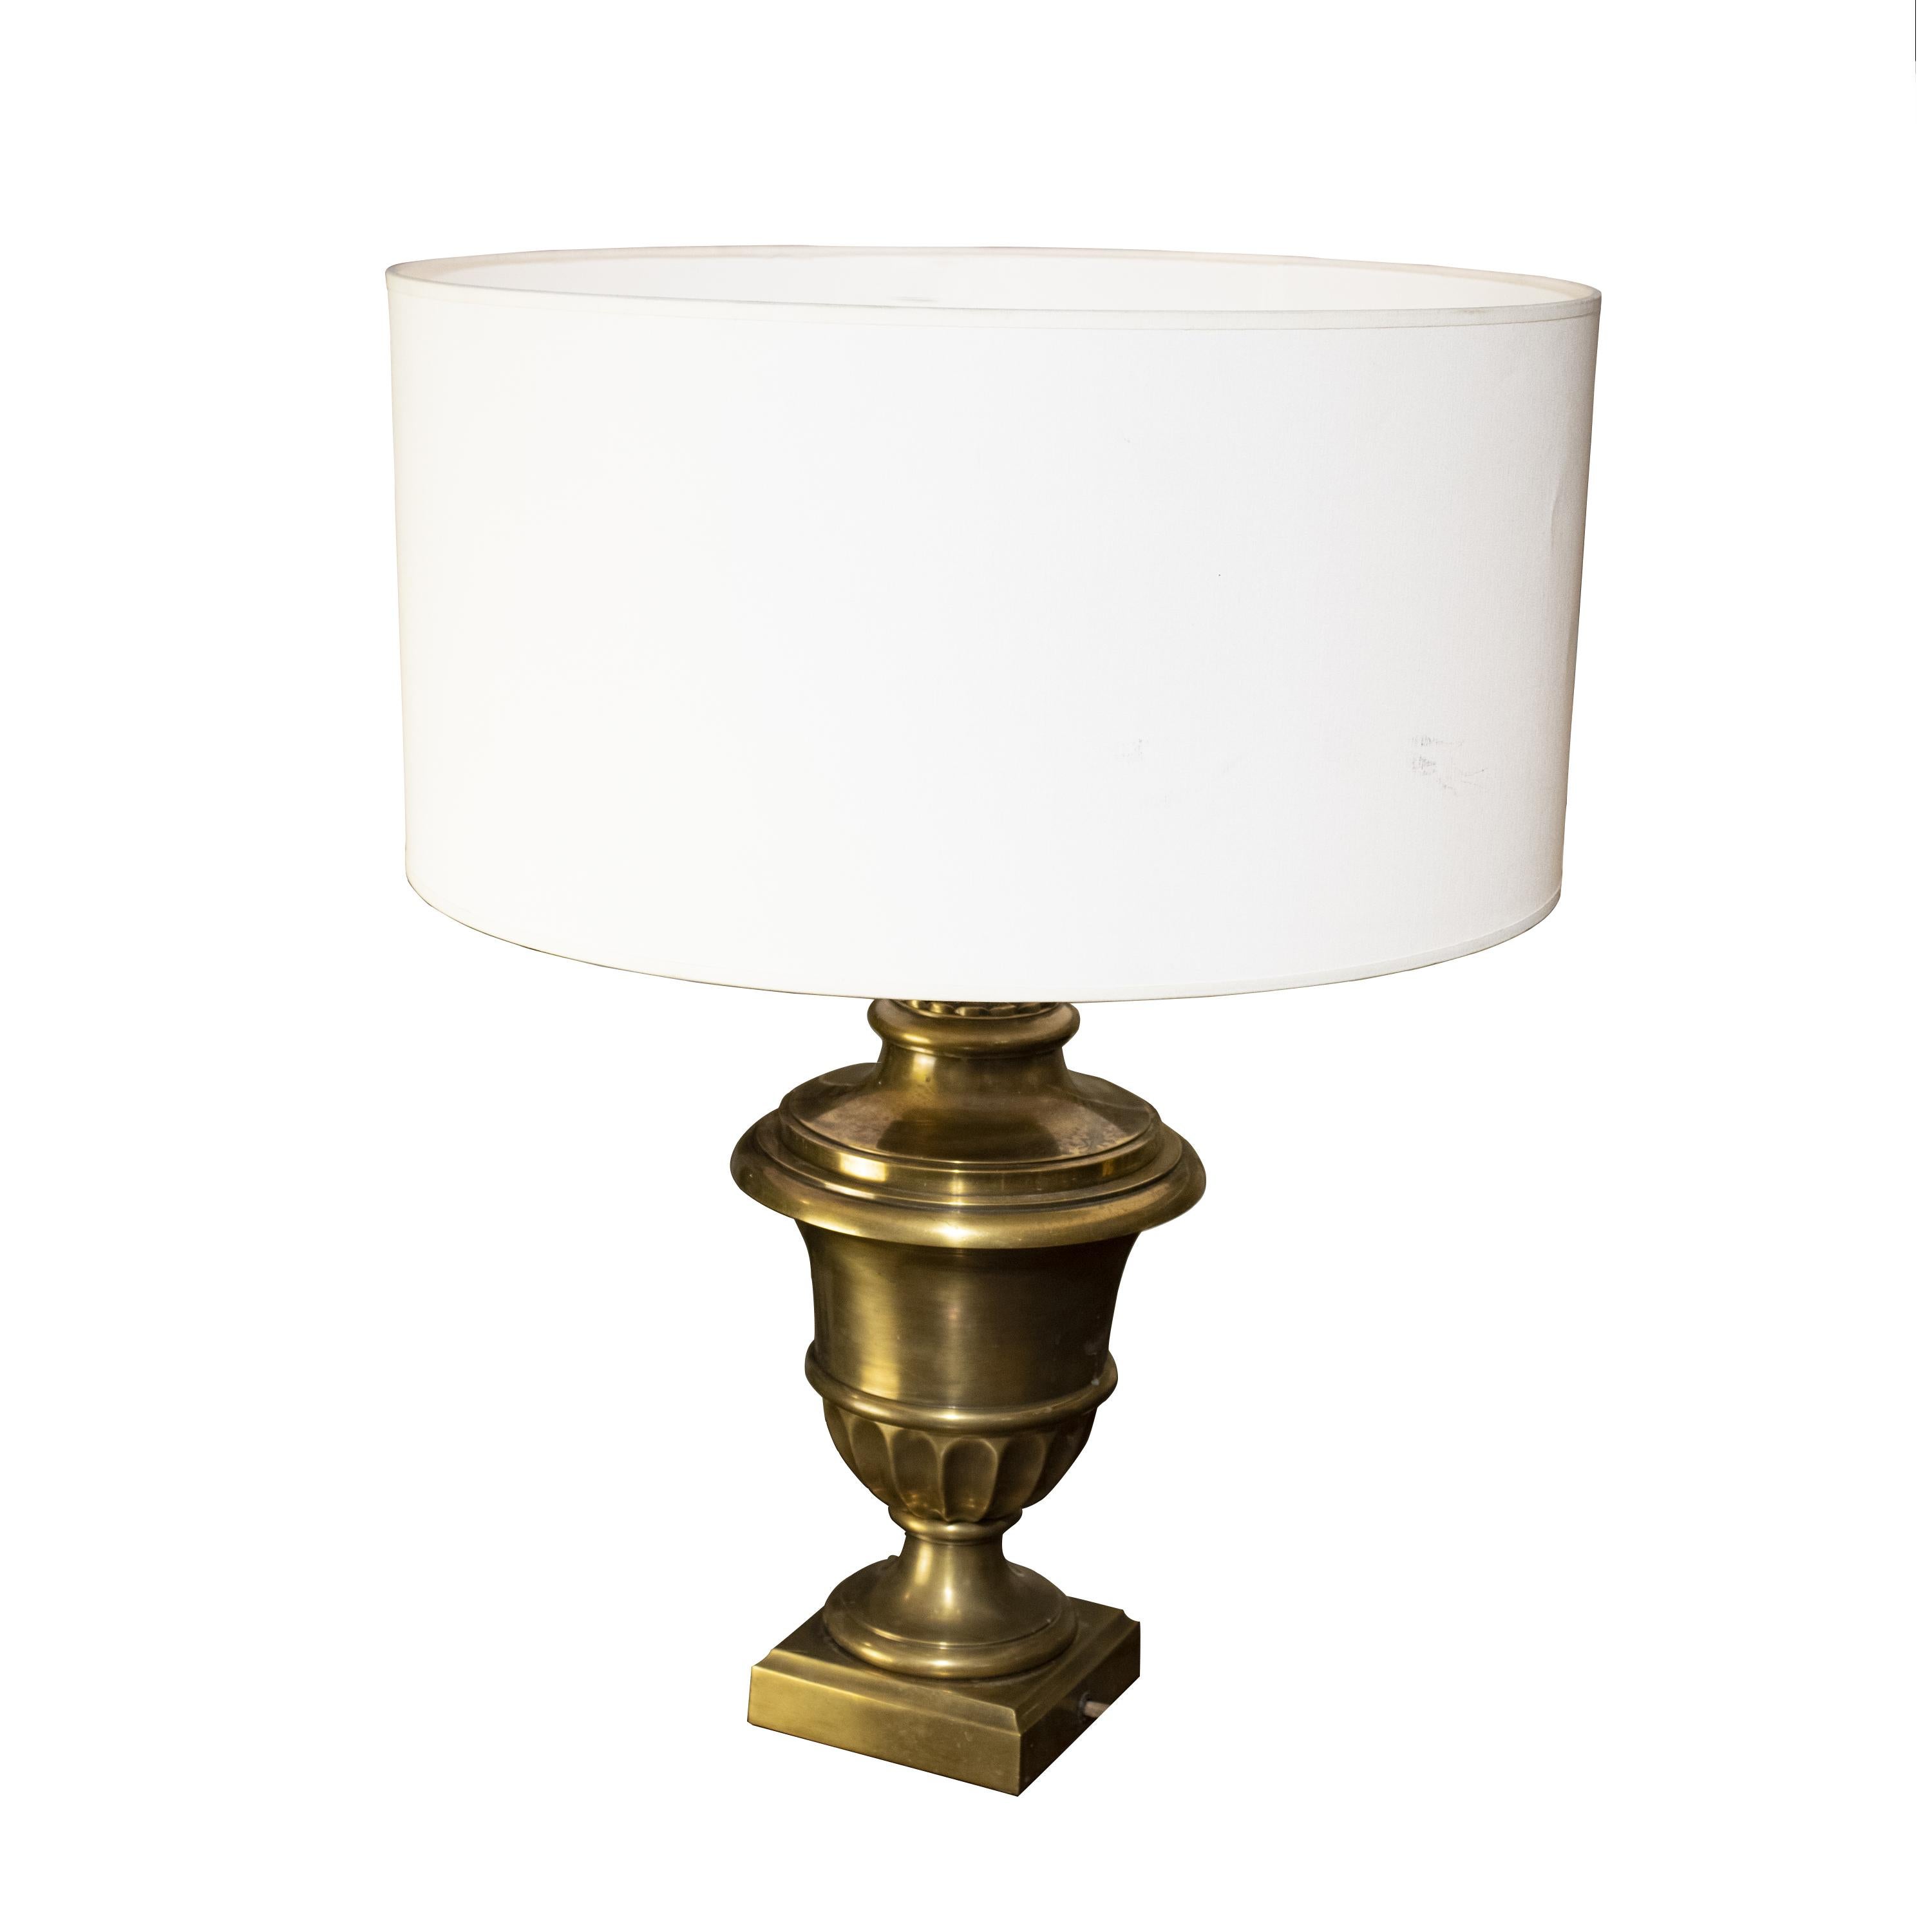 France table lamp with an hourglass-shaped structure and a rectangular base. 
The lampshade is made of an Off-white fabric.

Measurements:
Screen High: 25 cm
Width base: 22cm
Depth base: 13,7 cm
High: 66 cm